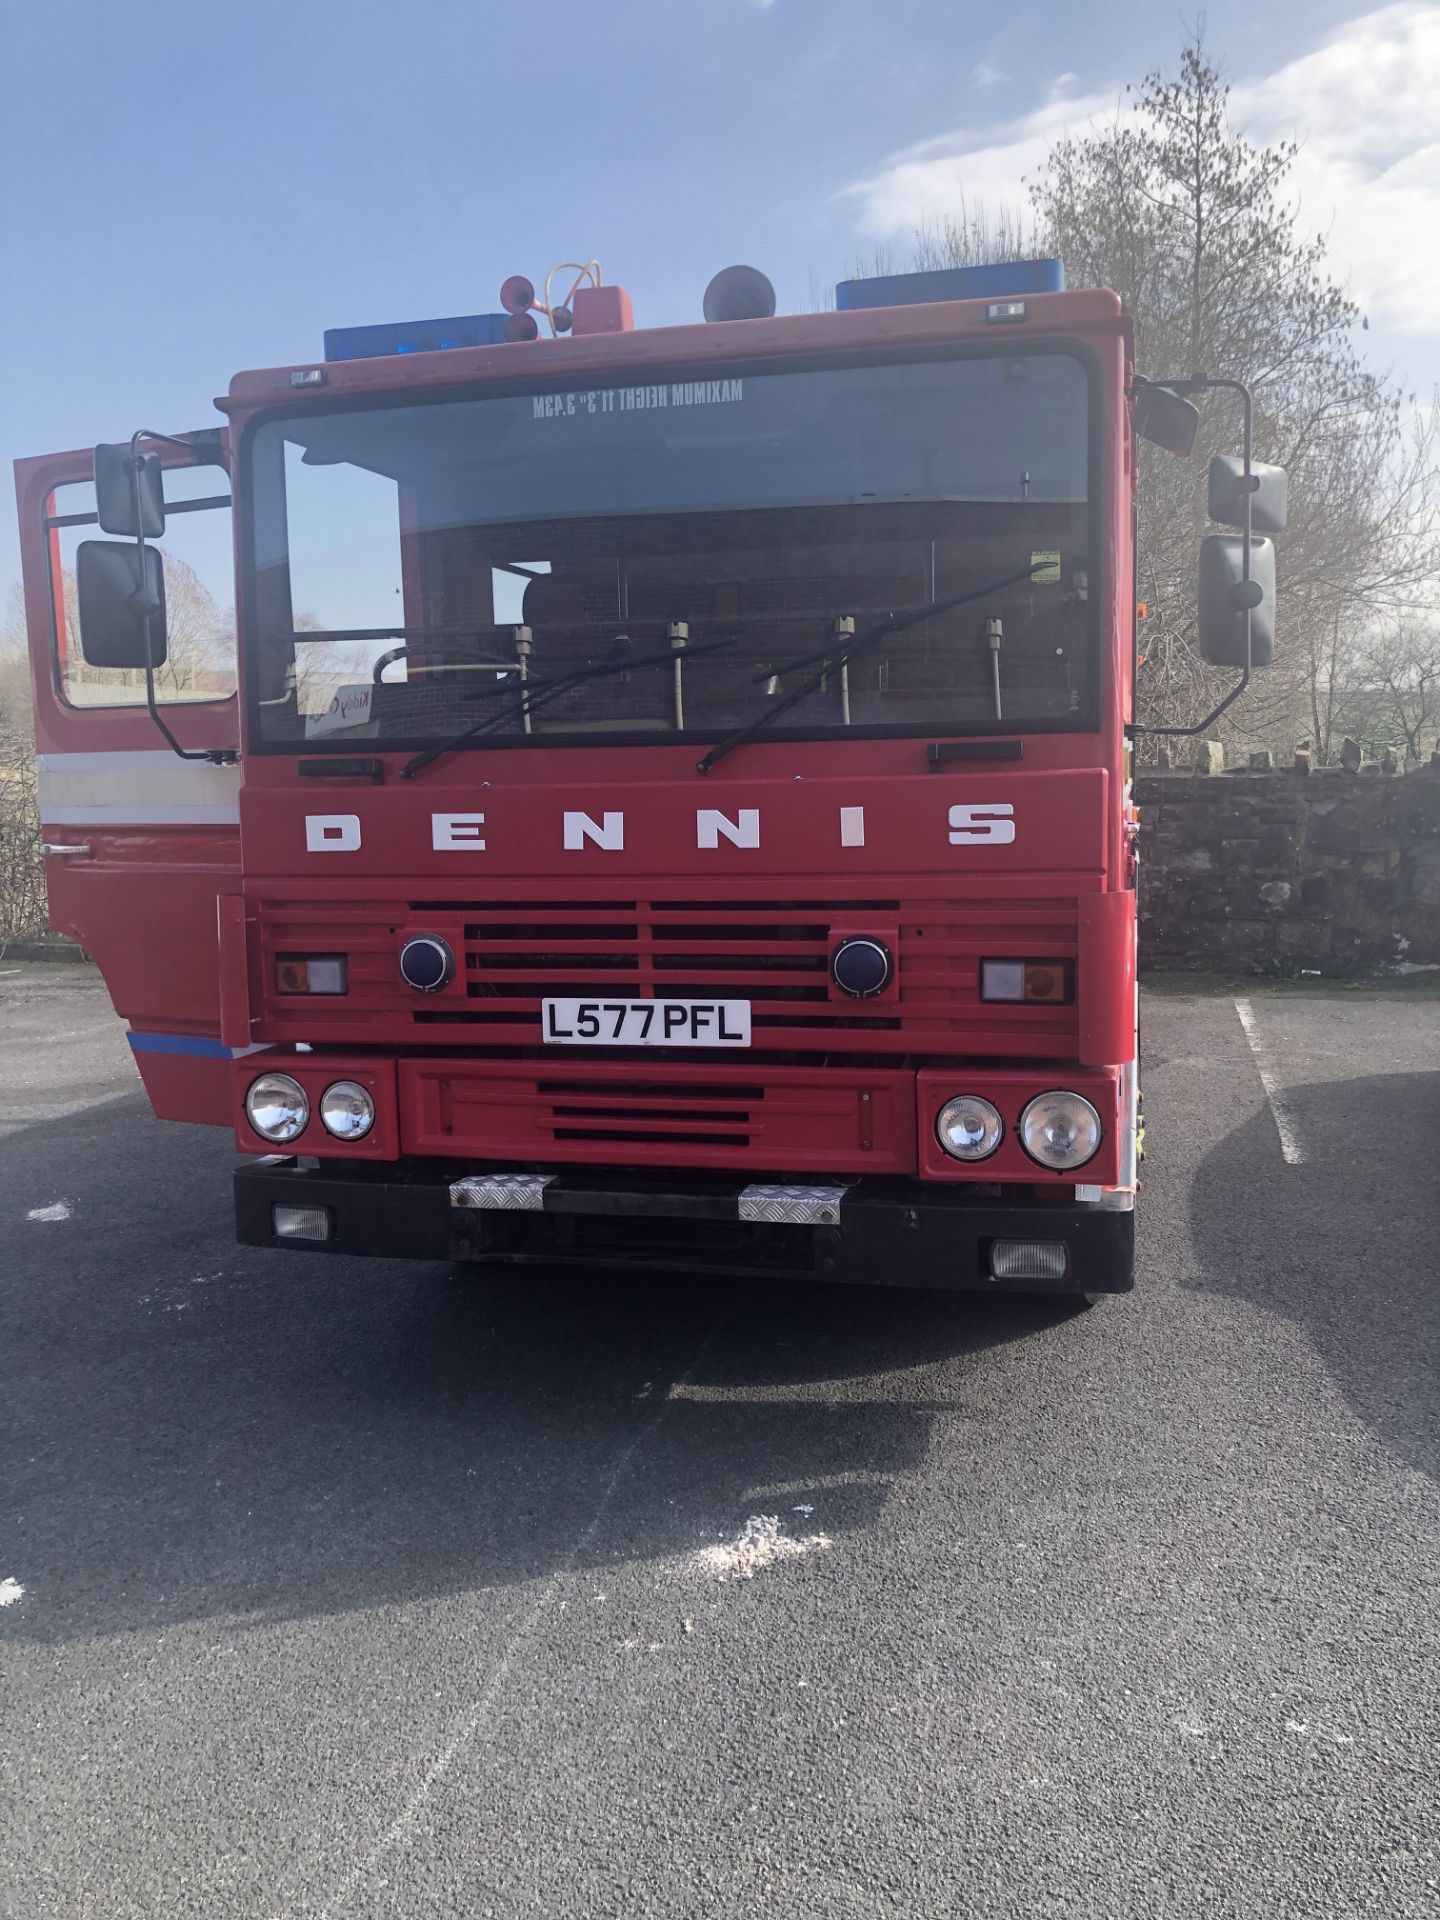 DENNIS FIRE ENGINE TRUCK - RESERVE LOWERED!!! PRICED TO CLEAR - Image 2 of 9